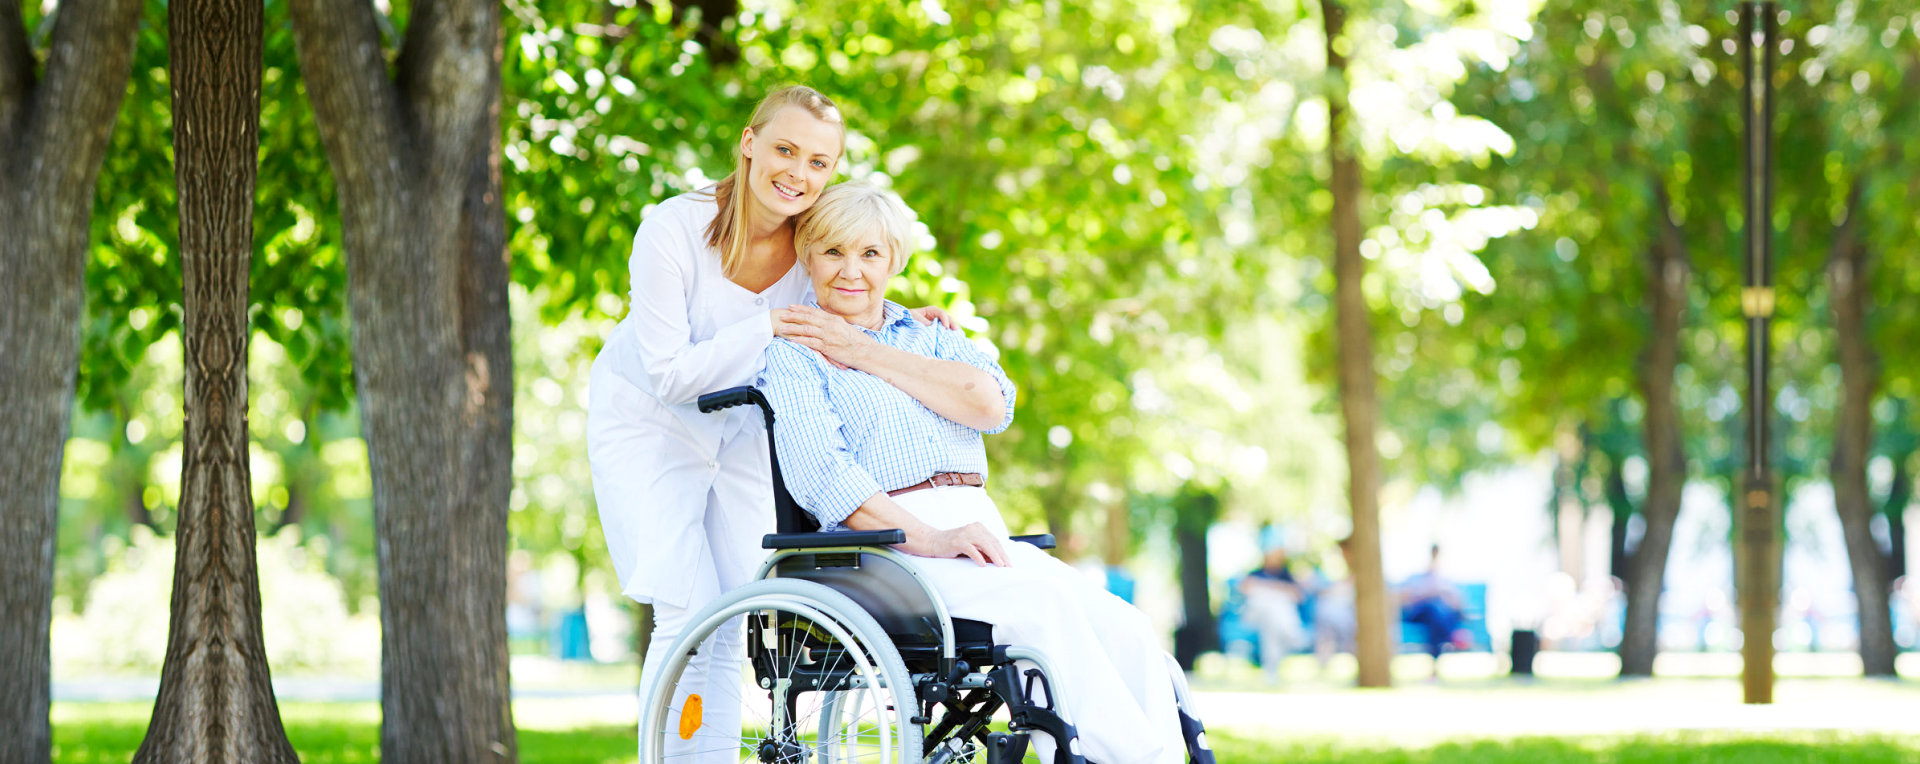 Smiling caregiver and elderly woman